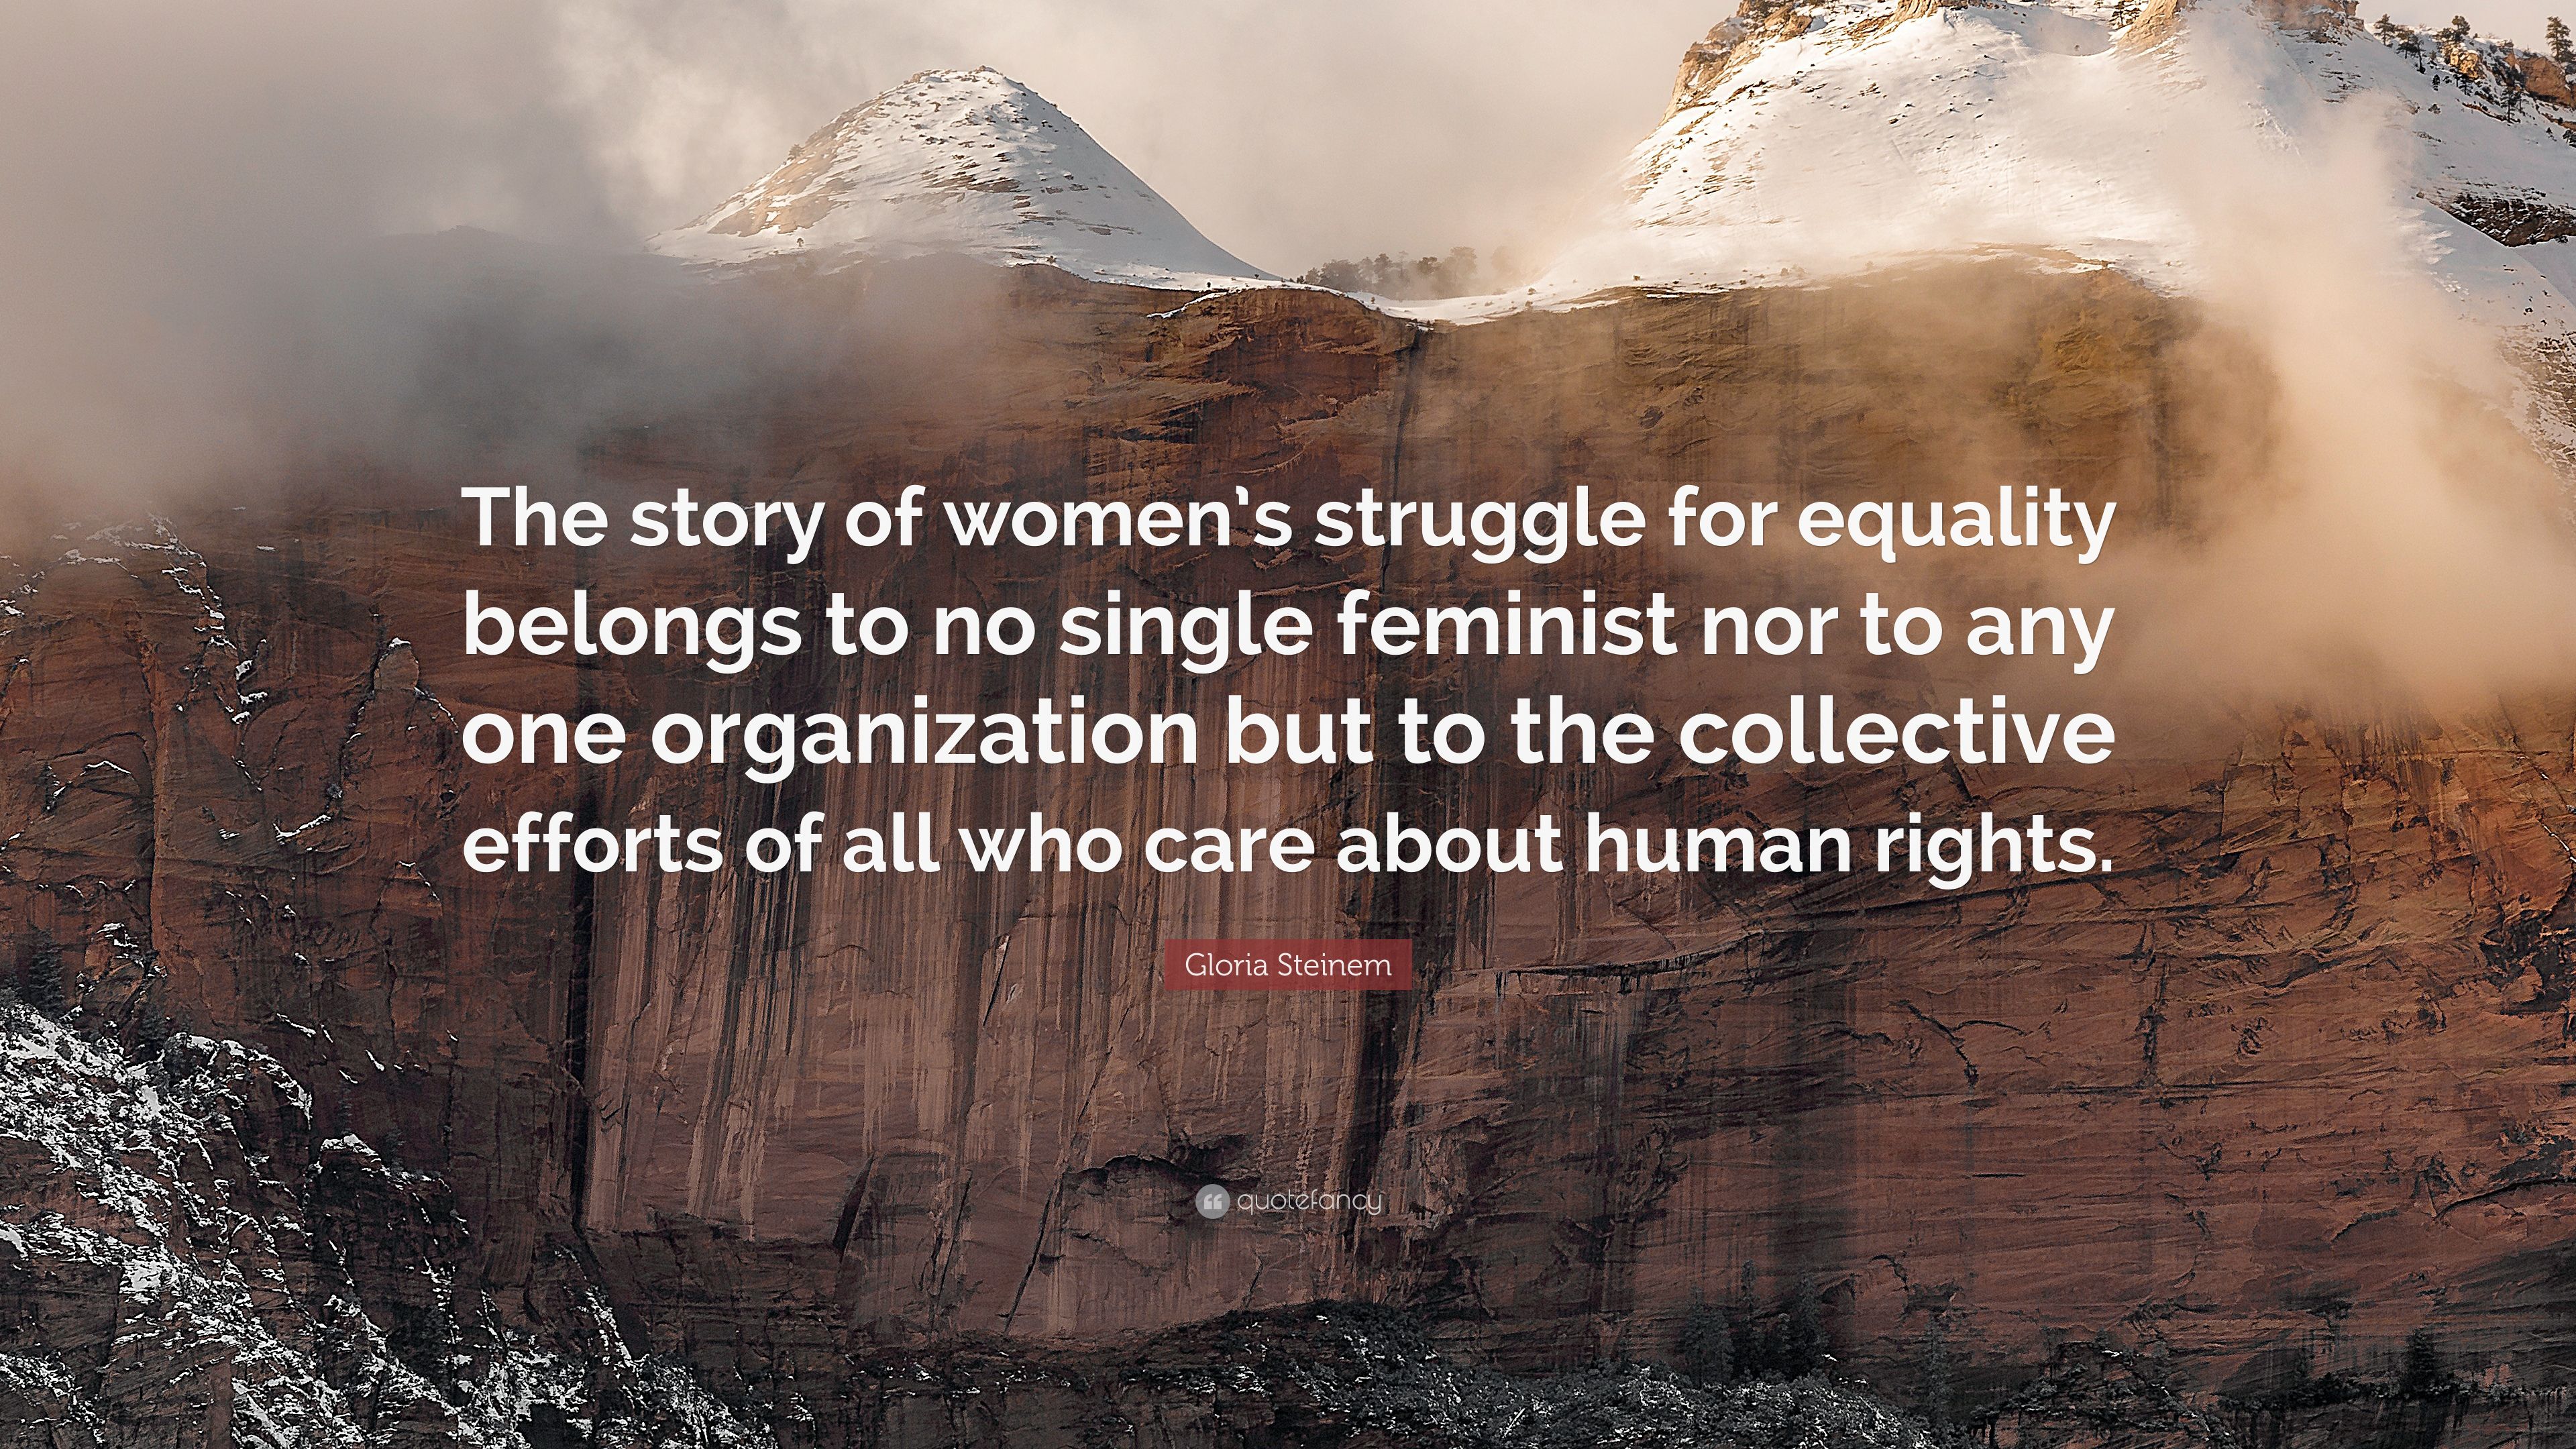 Gloria Steinem Quote: “The story of women's struggle for equality